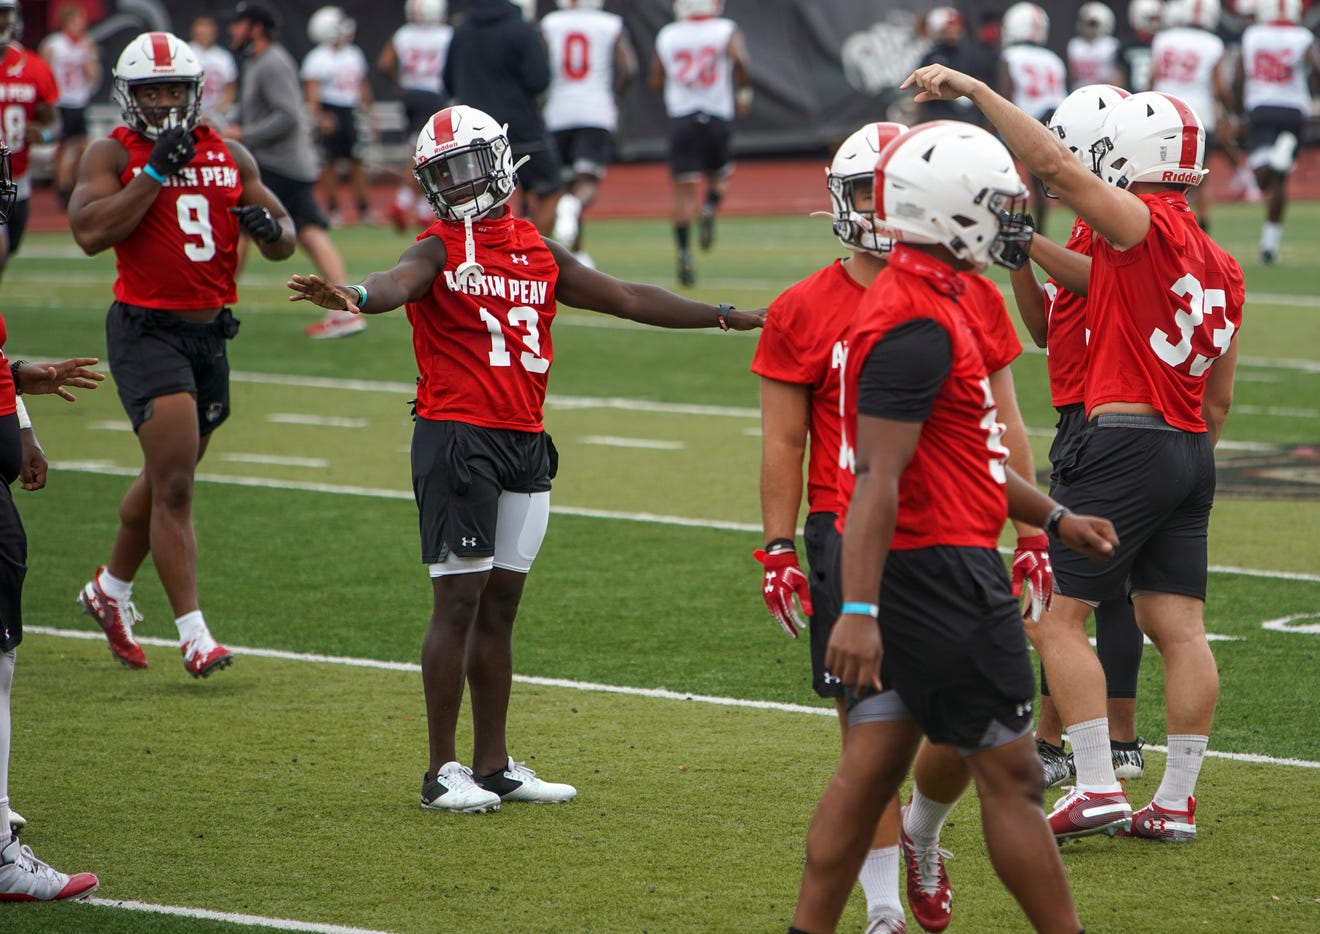 Austin Peay football ready for fall schedule, hoping for spring playoff chance